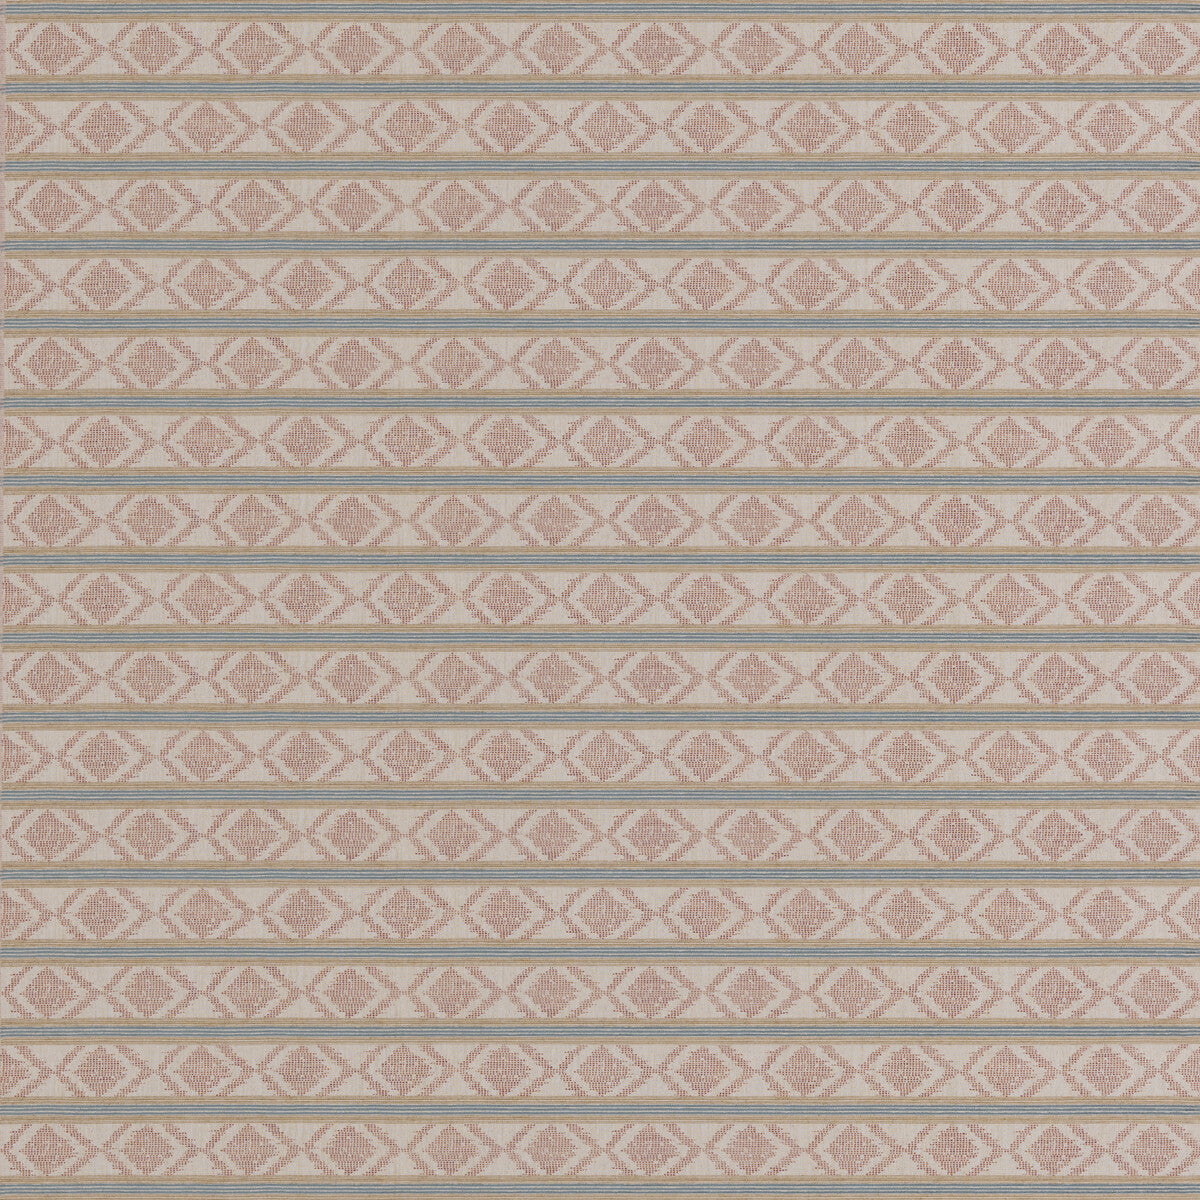 Burford Stripe fabric in coral/aqua color - pattern BF11034.3.0 - by G P &amp; J Baker in the Burford Weaves collection